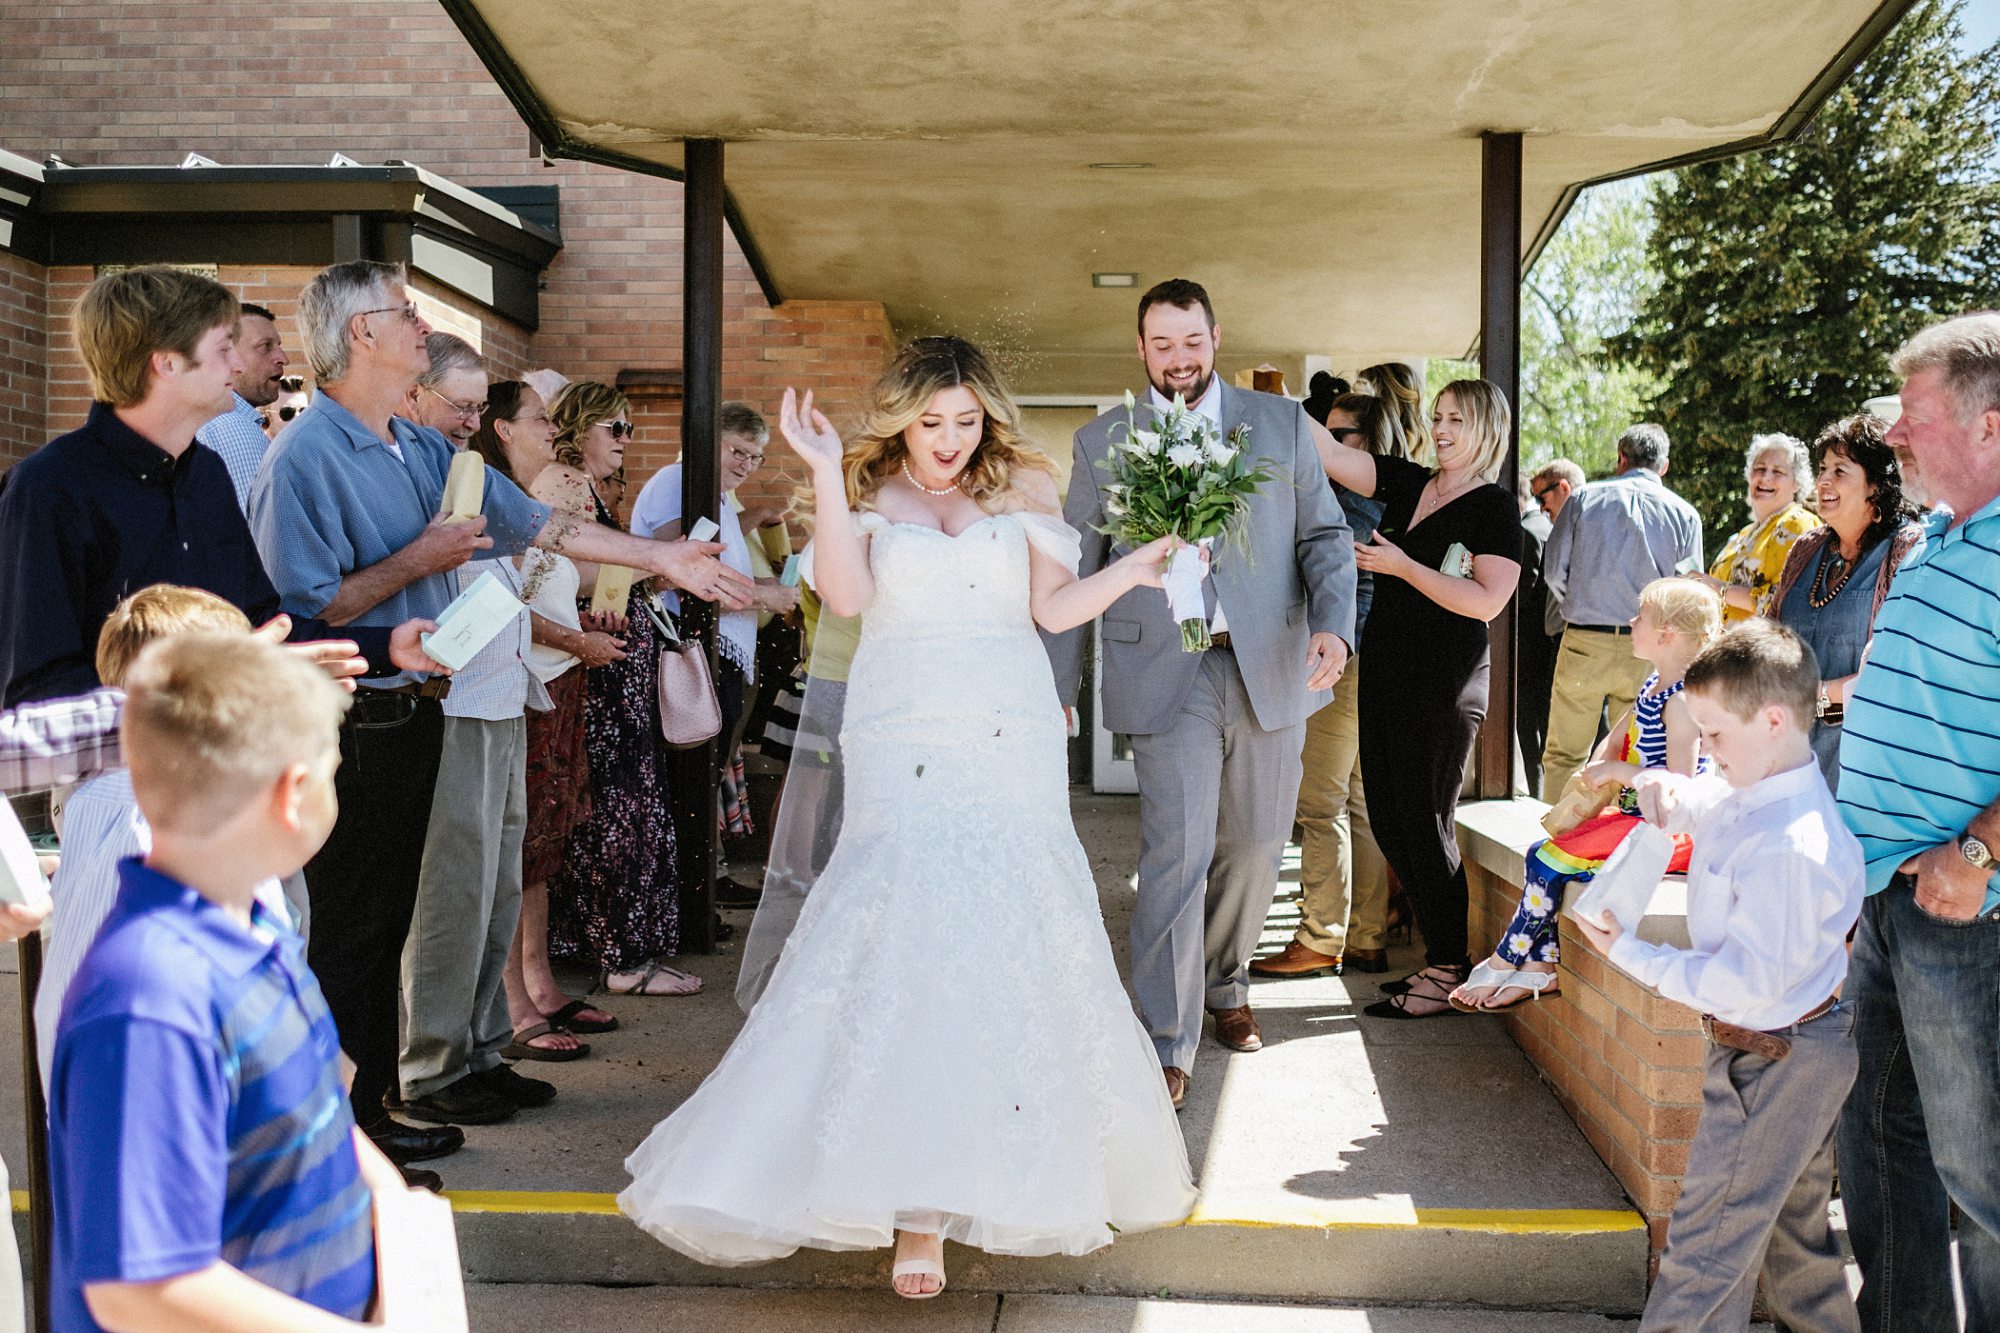 guests throwing lavender, recessional, receiving line